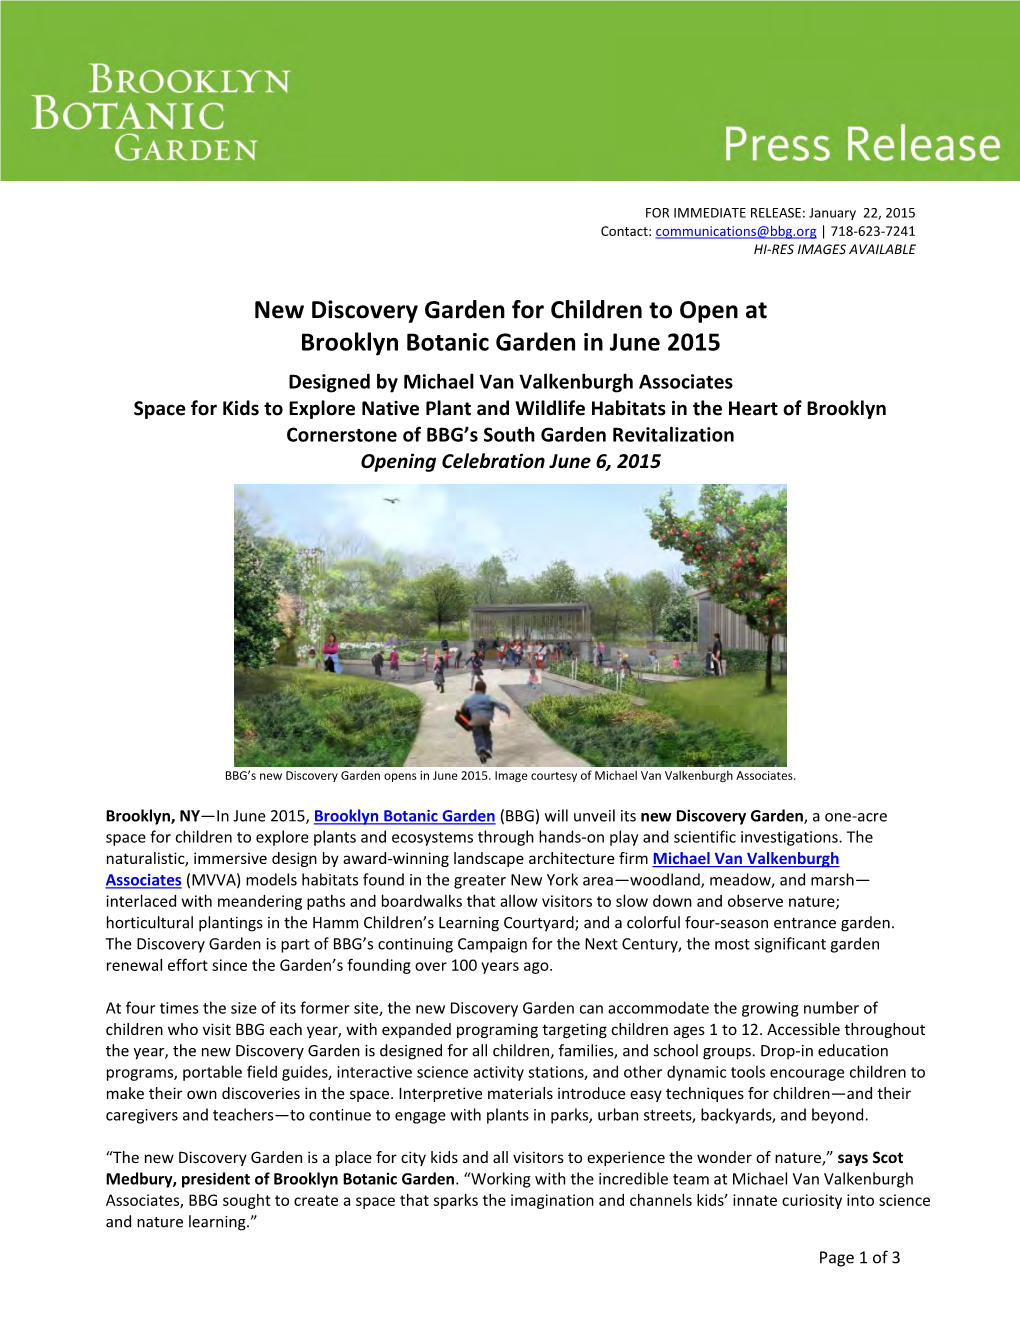 New Discovery Garden for Children to Open at Brooklyn Botanic Garden In